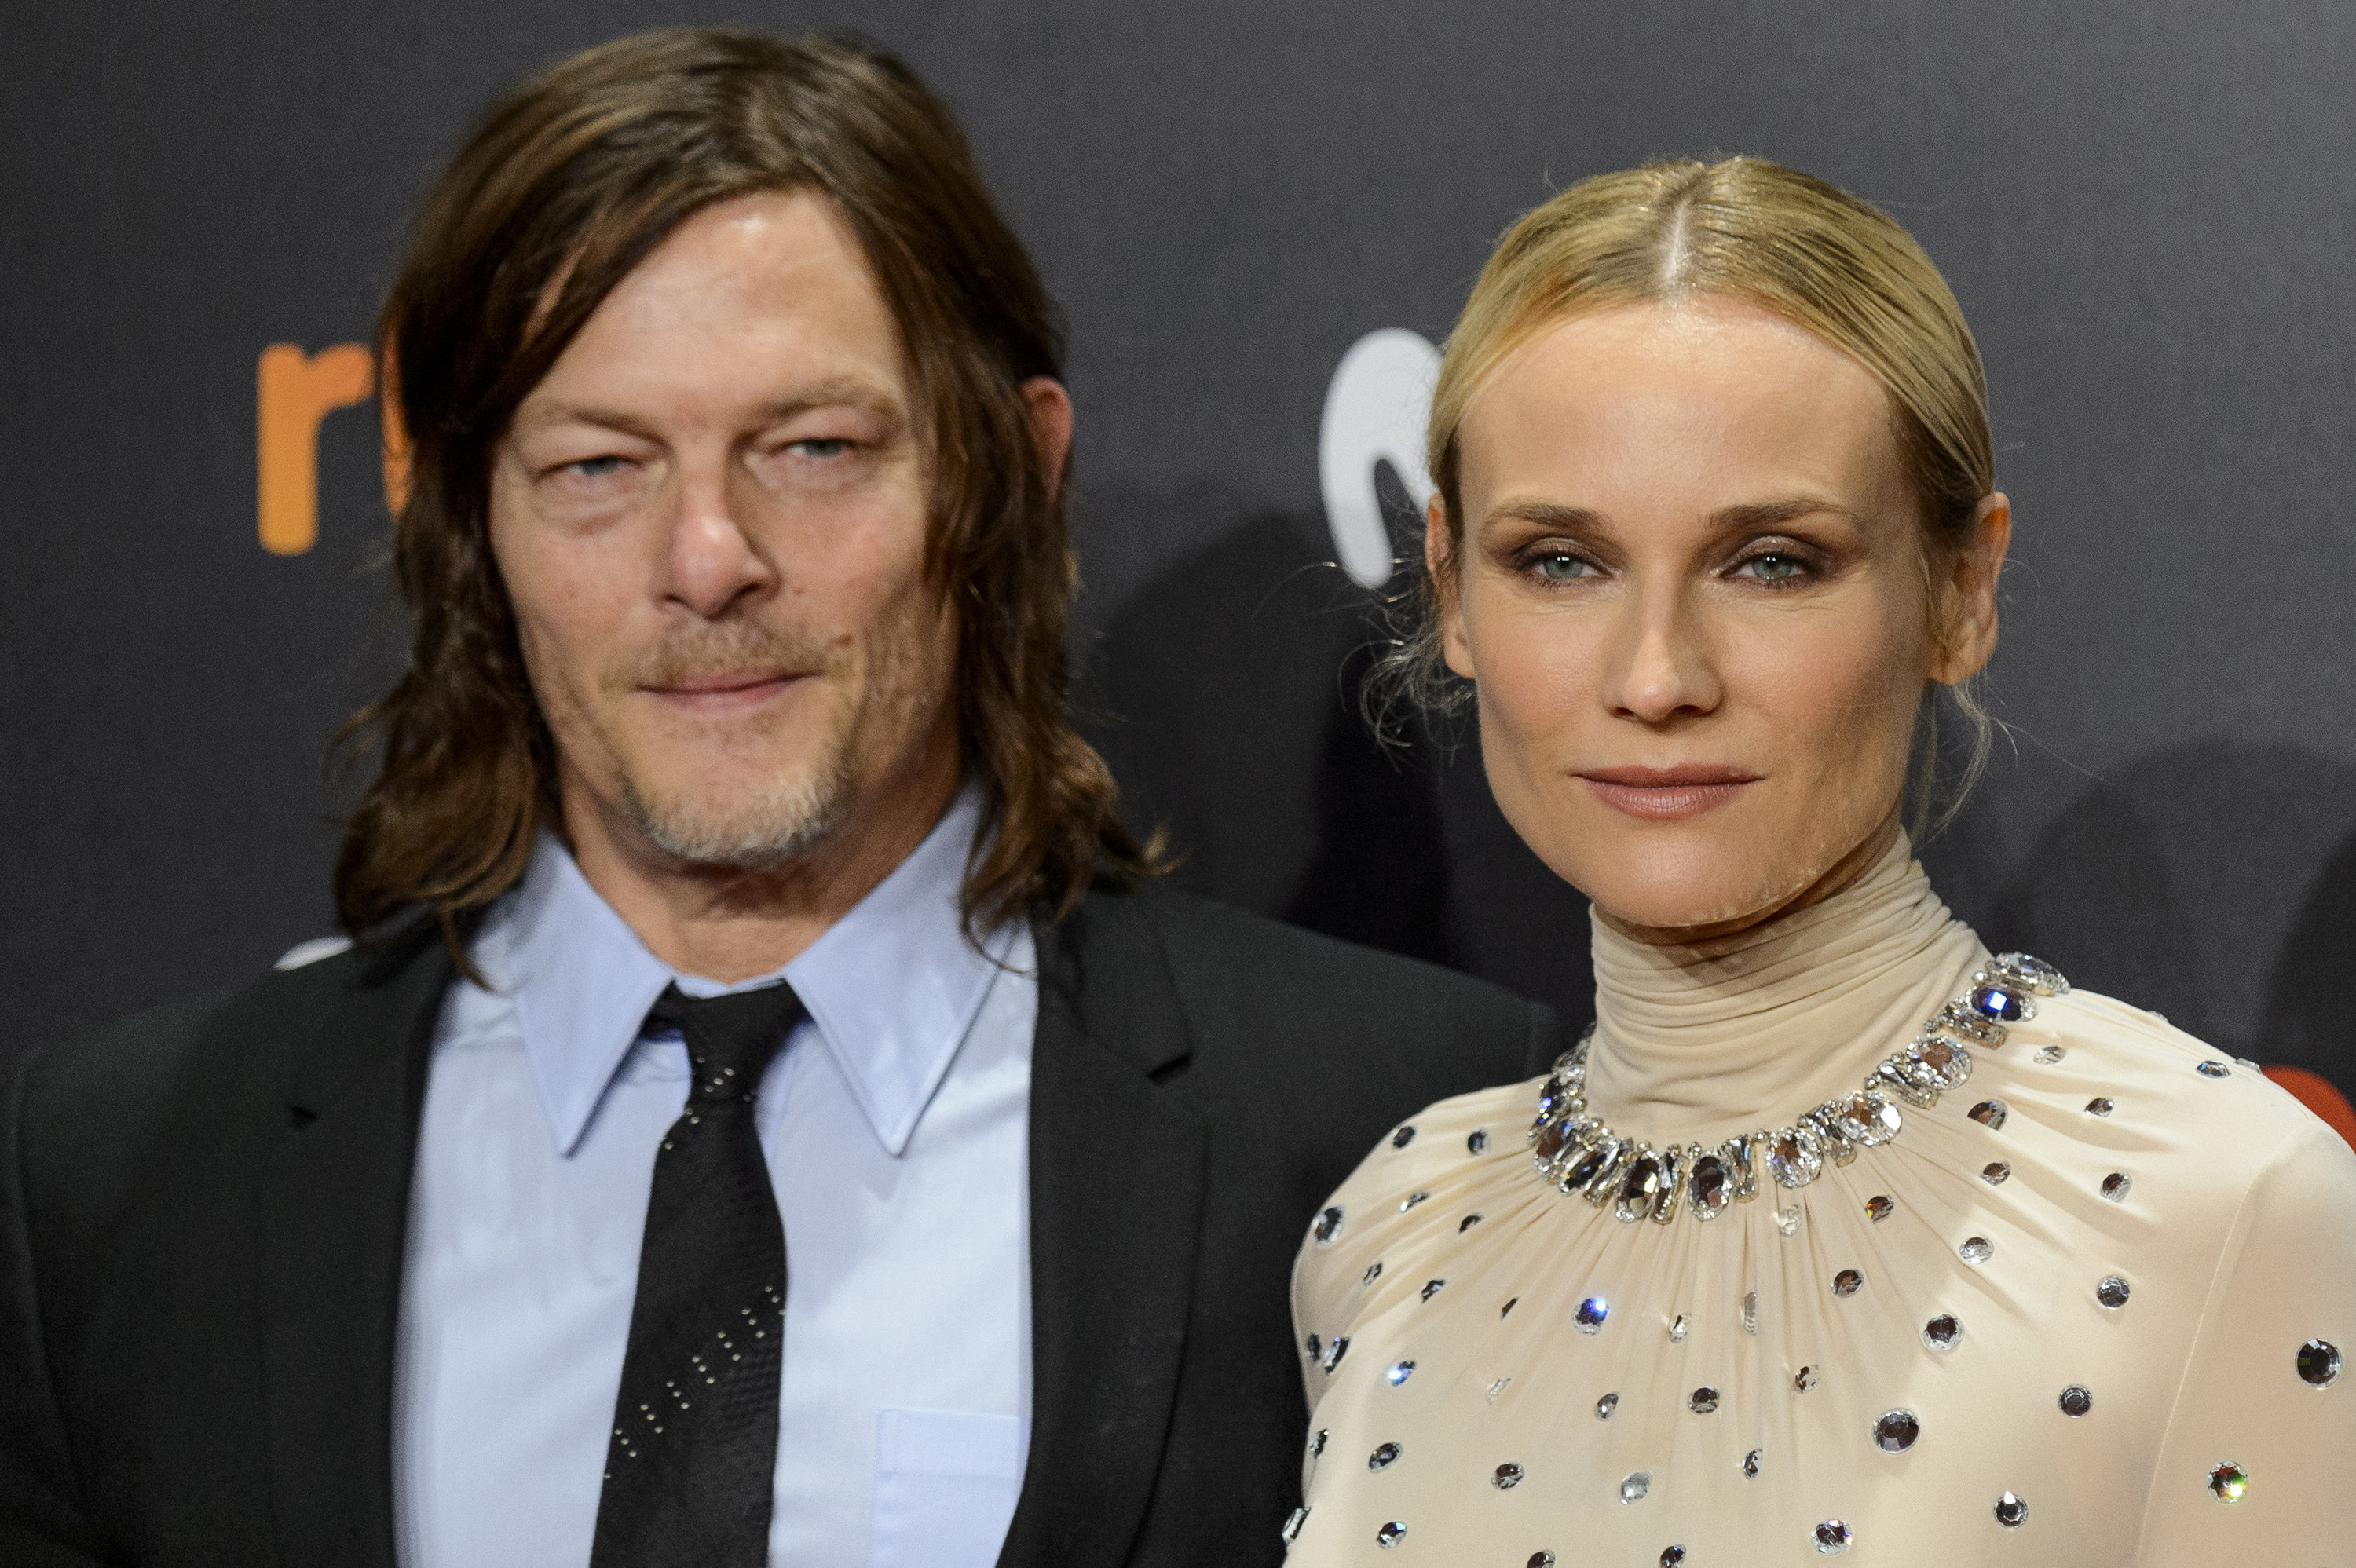 Norman Reedus and Diane Kruger at a movie premiere